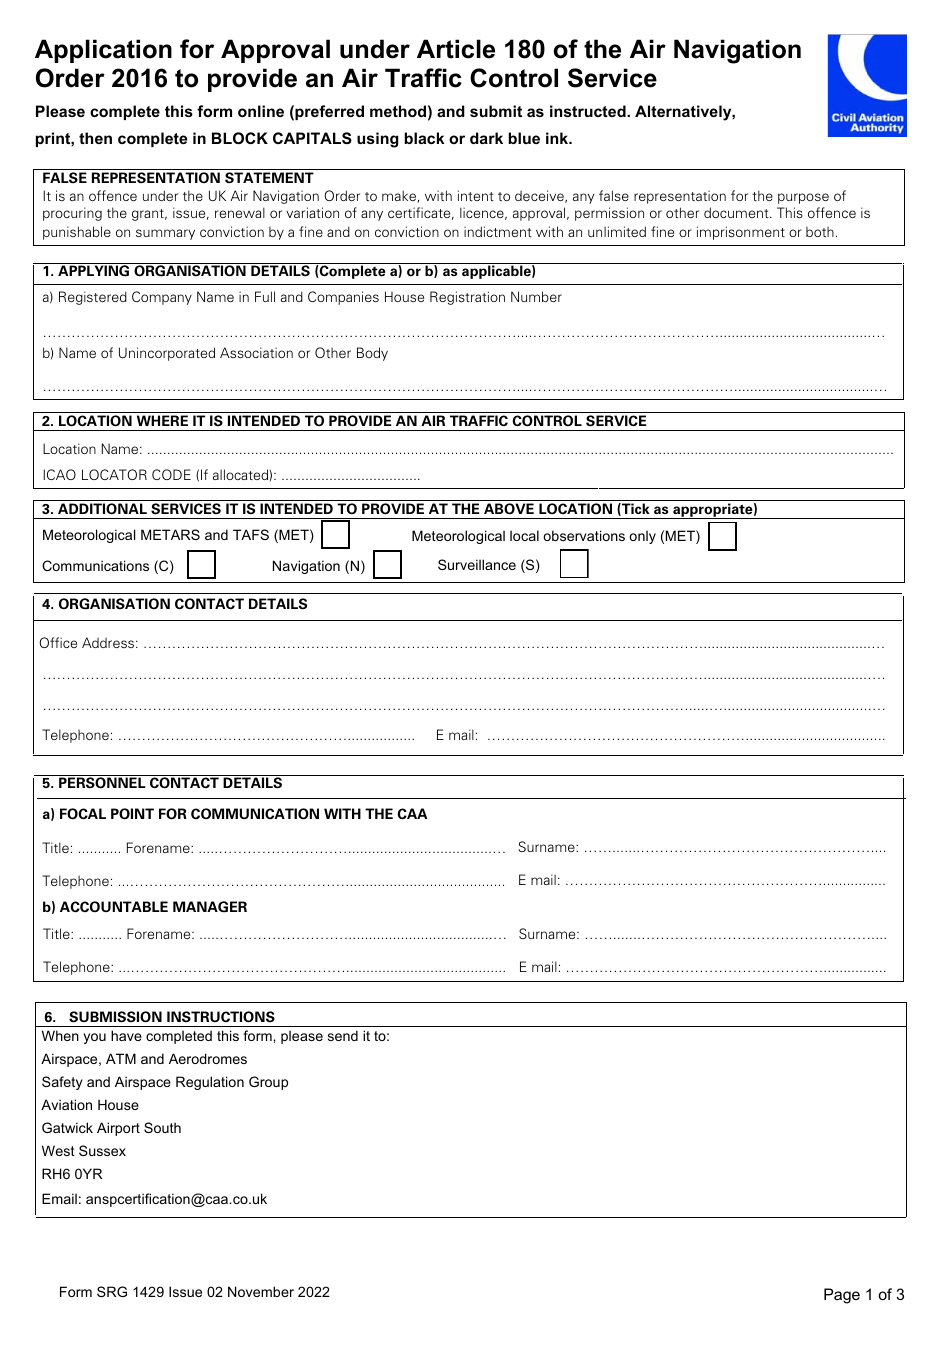 Form SRG1429 Application for Approval Under Article 180 of the Air Navigation Order 2016 to Provide an Air Traffic Control Service - United Kingdom, Page 1